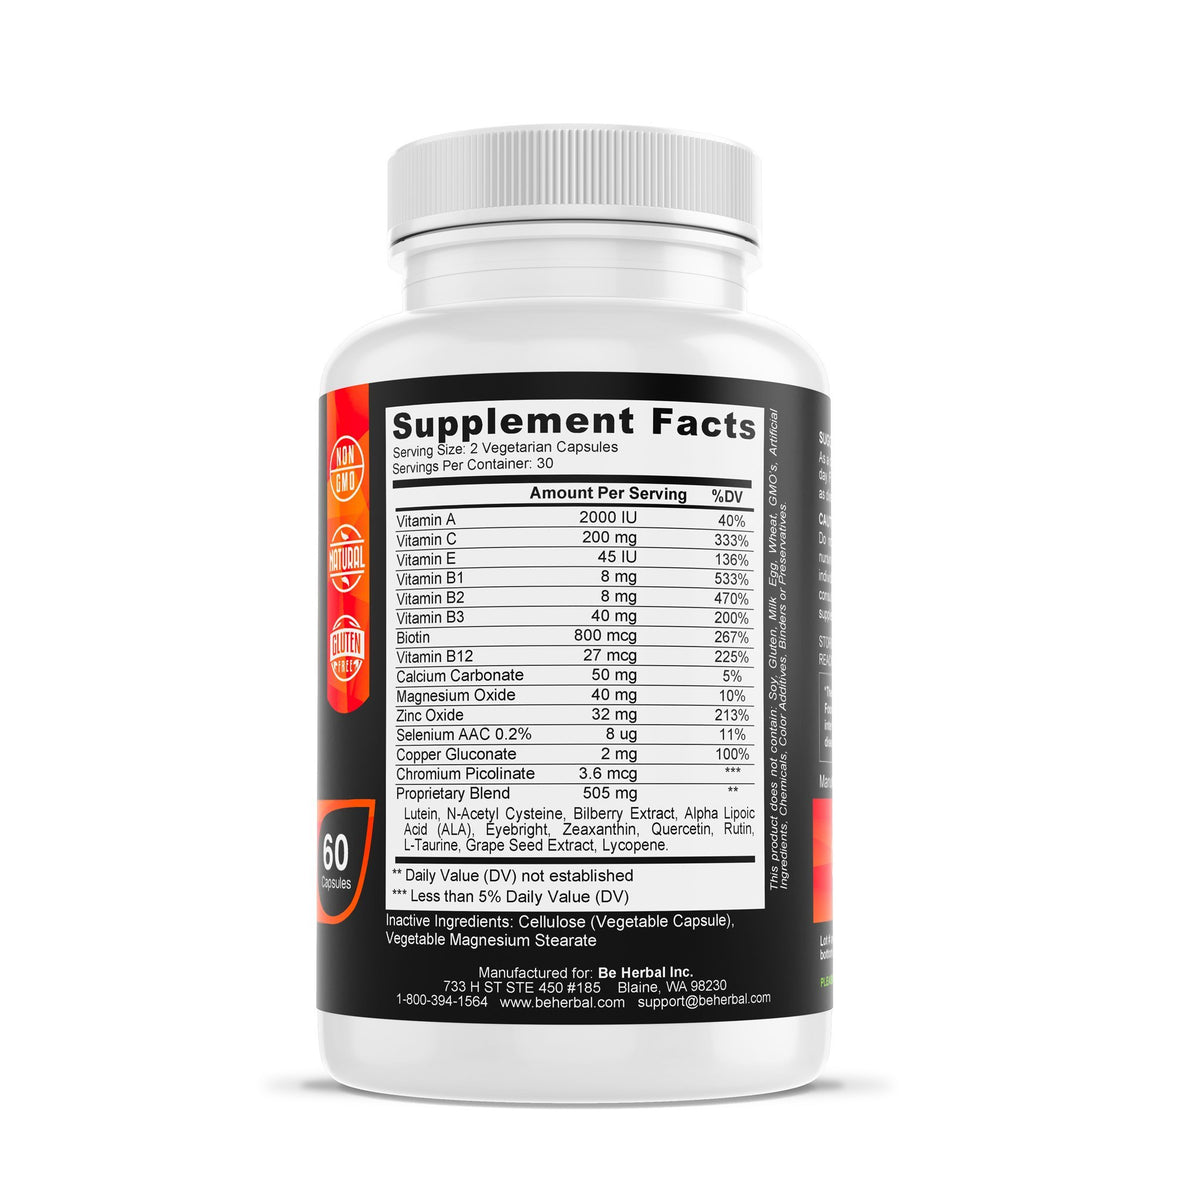 Pro Vision Complex - Advanced Vision Support with Lutein Herbal Supplements Be Herbal®